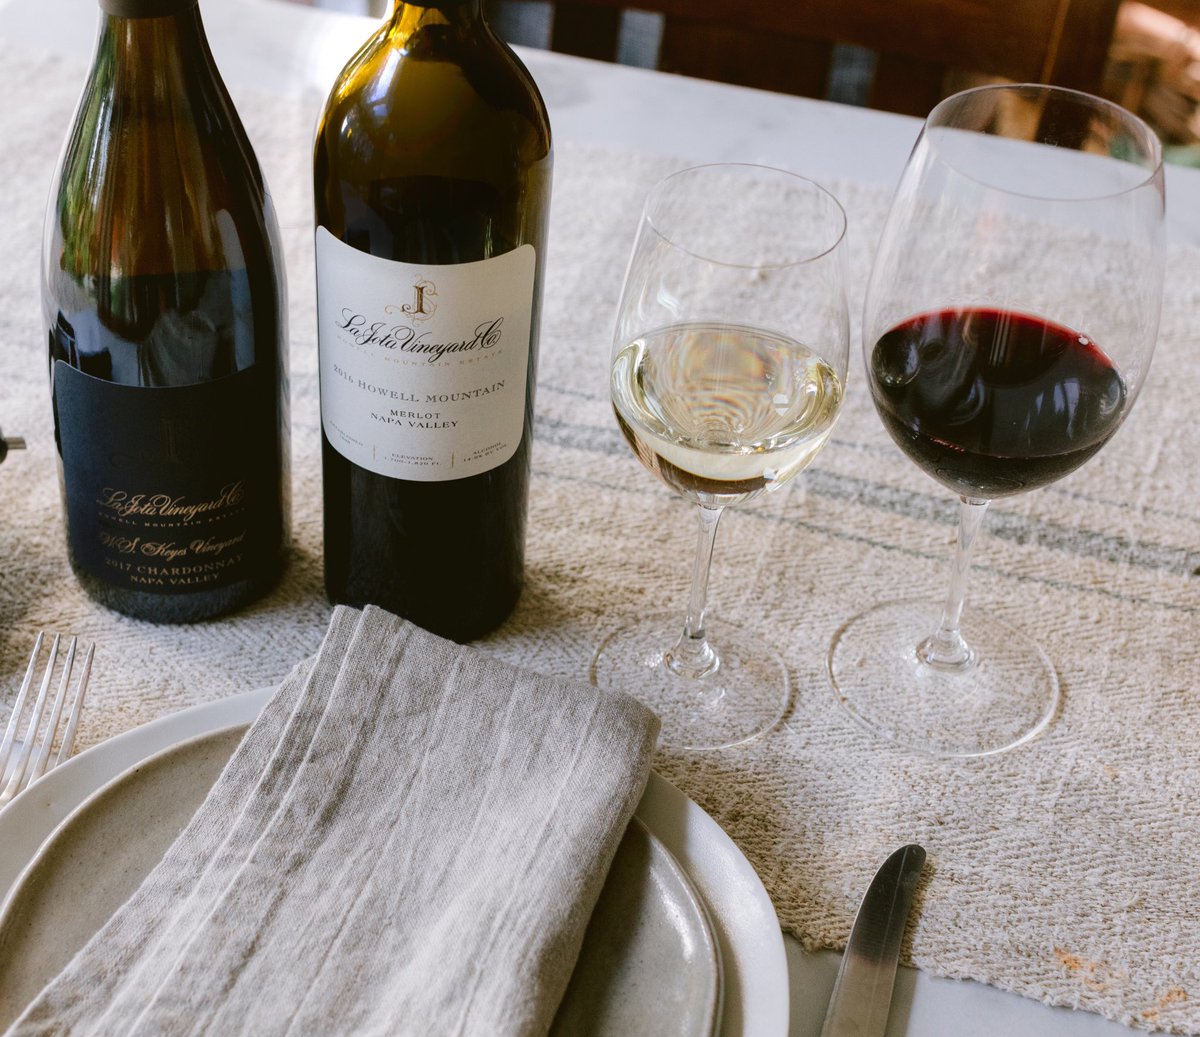 Treating Dad to the best of both worlds tonight: our Howell Mountain Merlot and W.S. Keyes Vineyard Chardonnay. Happy Father’s Day 🍷